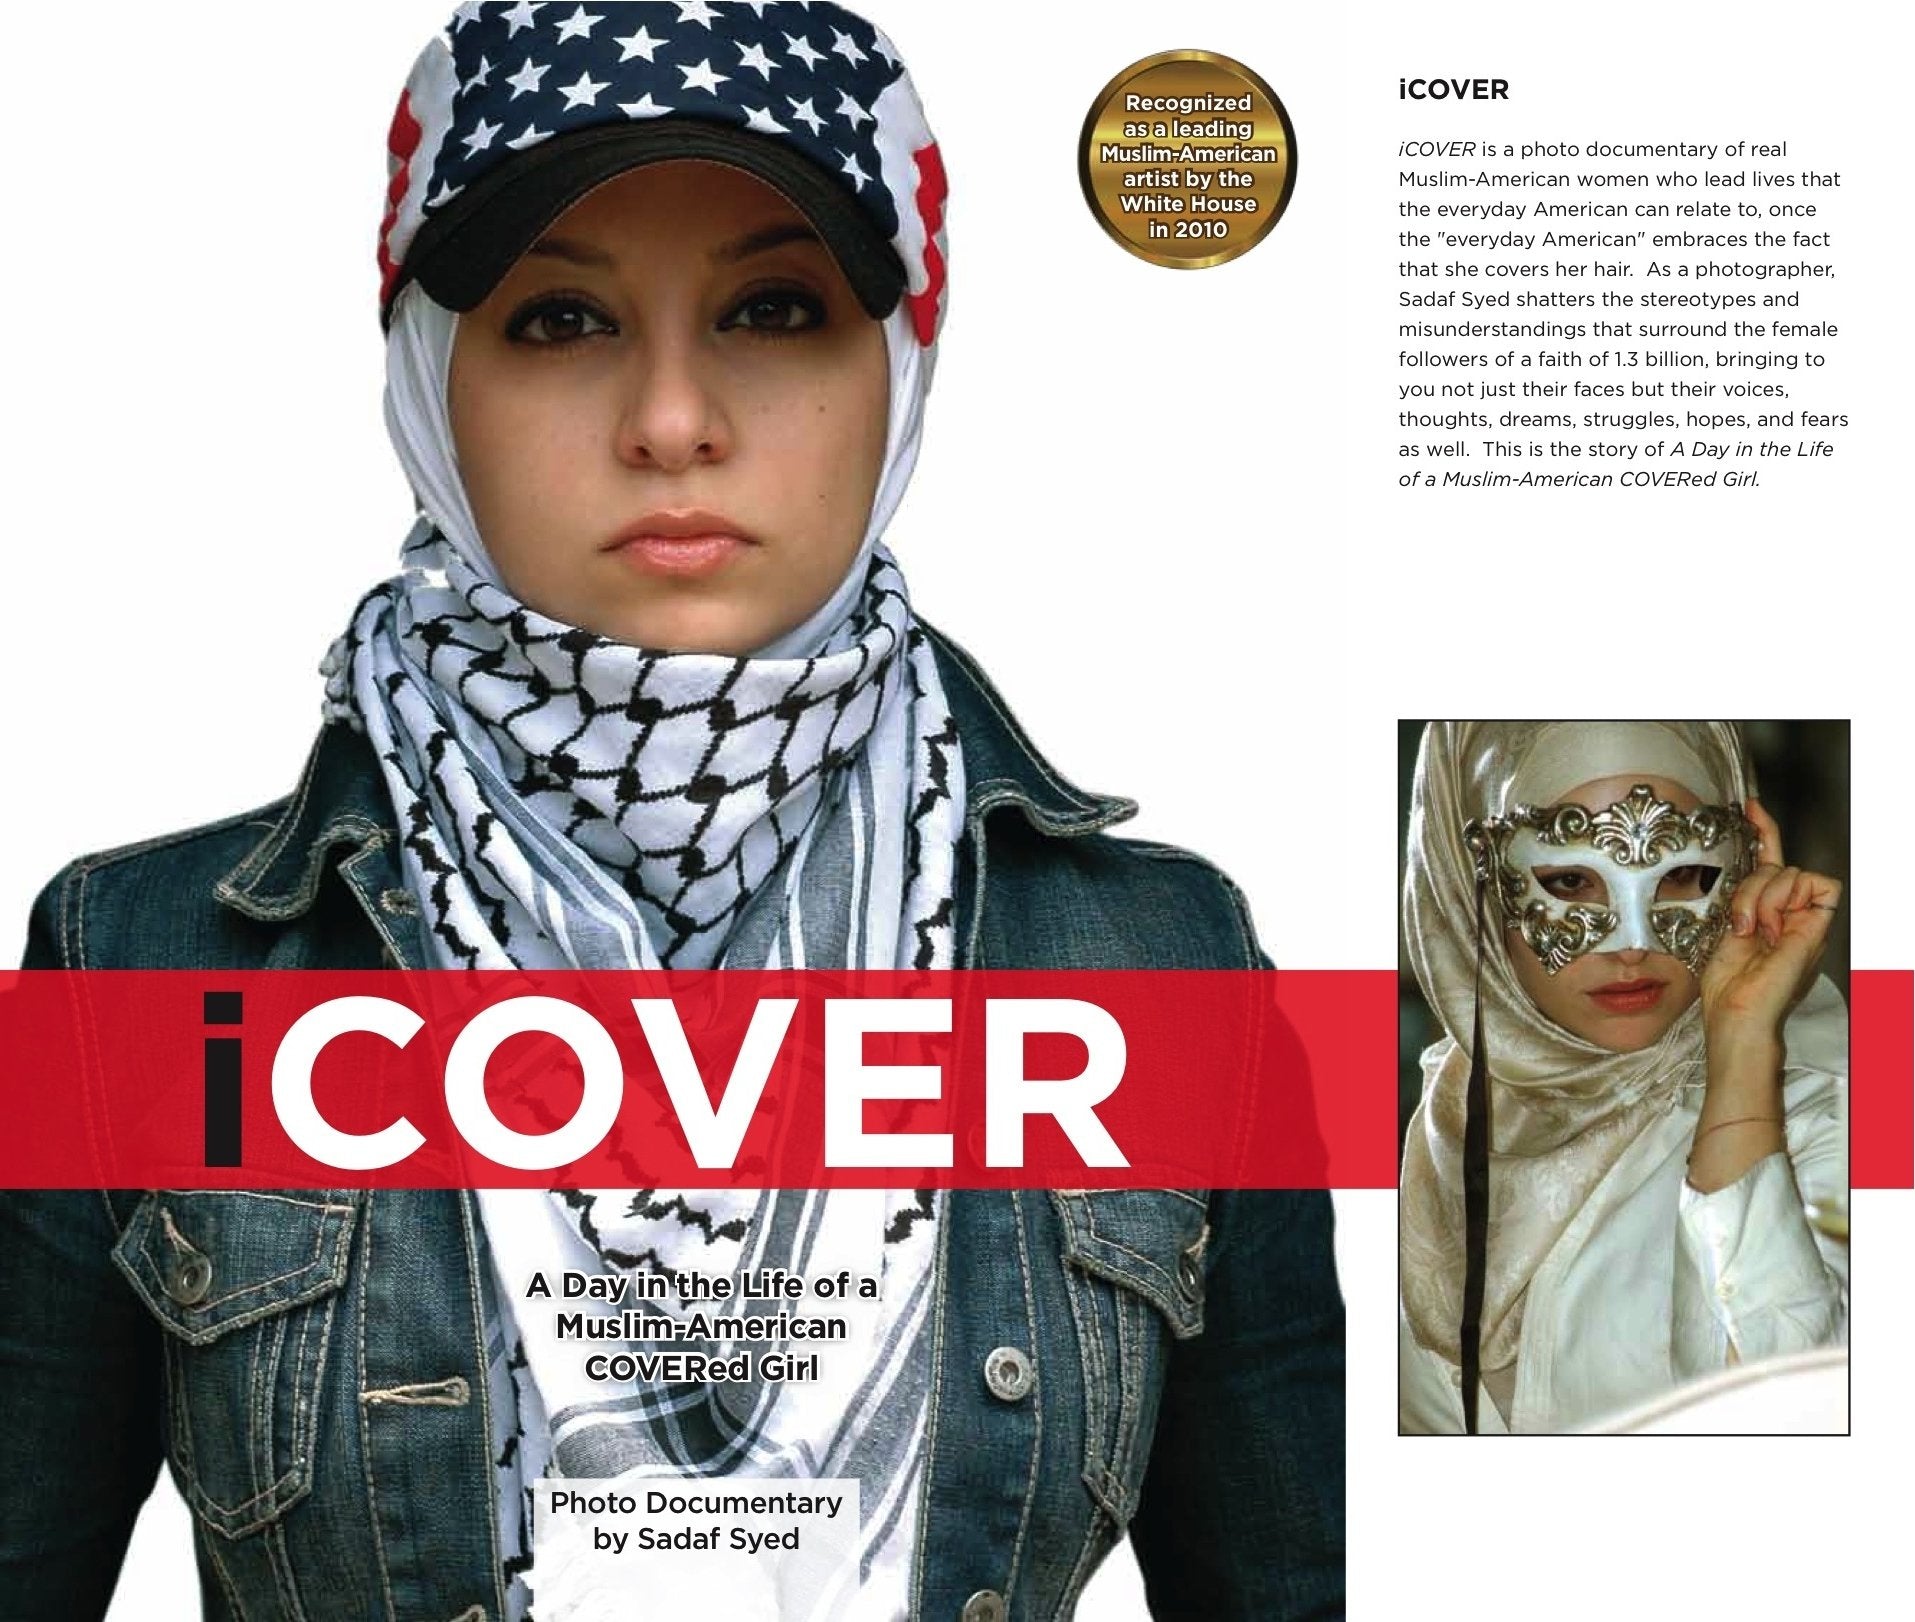 iCOVER: A Day in the Life of a Muslim-American COVERed Girl